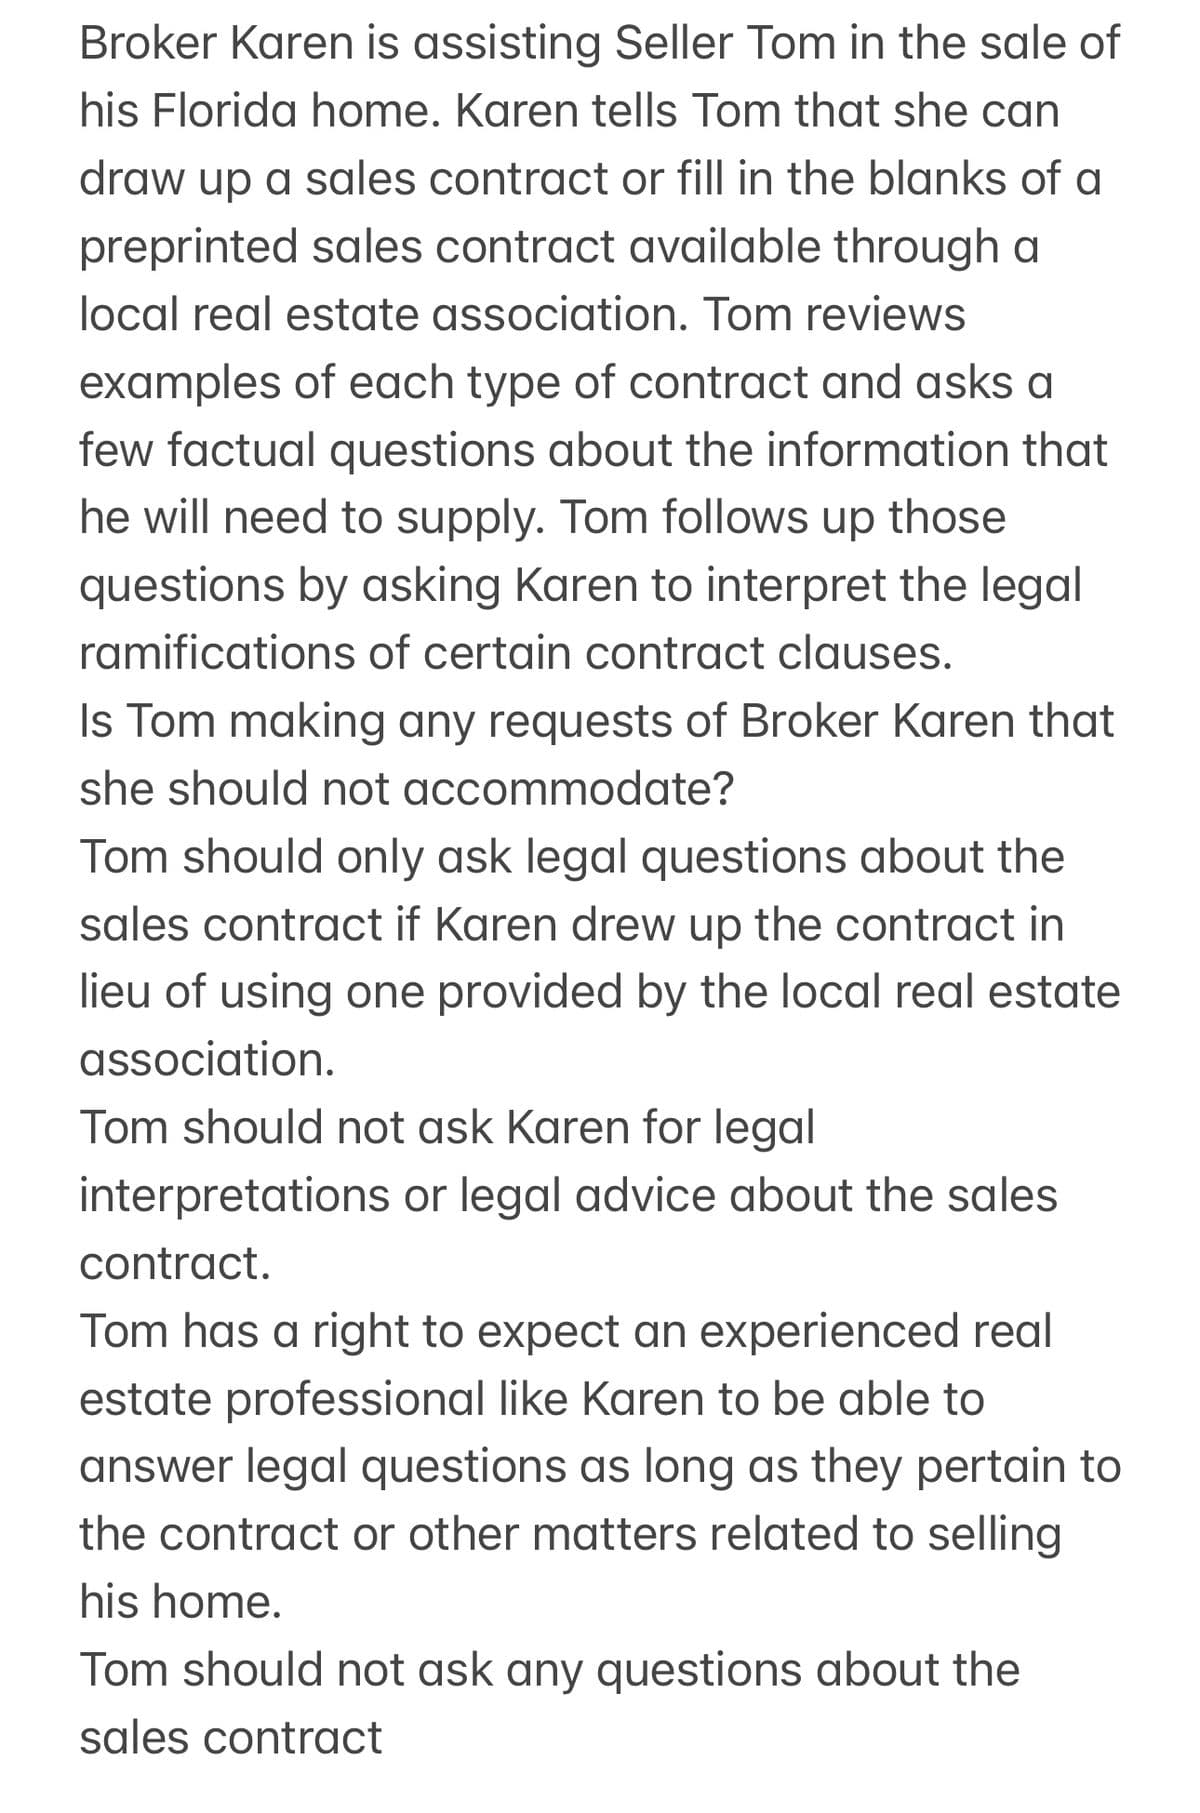 Broker Karen is assisting Seller Tom in the sale of
his Florida home. Karen tells Tom that she can
draw up a sales contract or fill in the blanks of a
preprinted sales contract available through a
local real estate association. Tom reviews
examples of each type of contract and asks a
few factual questions about the information that
he will need to supply. Tom follows up those
questions by asking Karen to interpret the legal
ramifications of certain contract clauses.
Is Tom making any requests of Broker Karen that
she should not accommodate?
Tom should only ask legal questions about the
sales contract if Karen drew up the contract in
lieu of using one provided by the local real estate
association.
Tom should not ask Karen for legal
interpretations or legal advice about the sales
contract.
Tom has a right to expect an experienced real
estate professional like Karen to be able to
answer legal questions as long as they pertain to
the contract or other matters related to selling
his home.
Tom should not ask any questions about the
sales contract